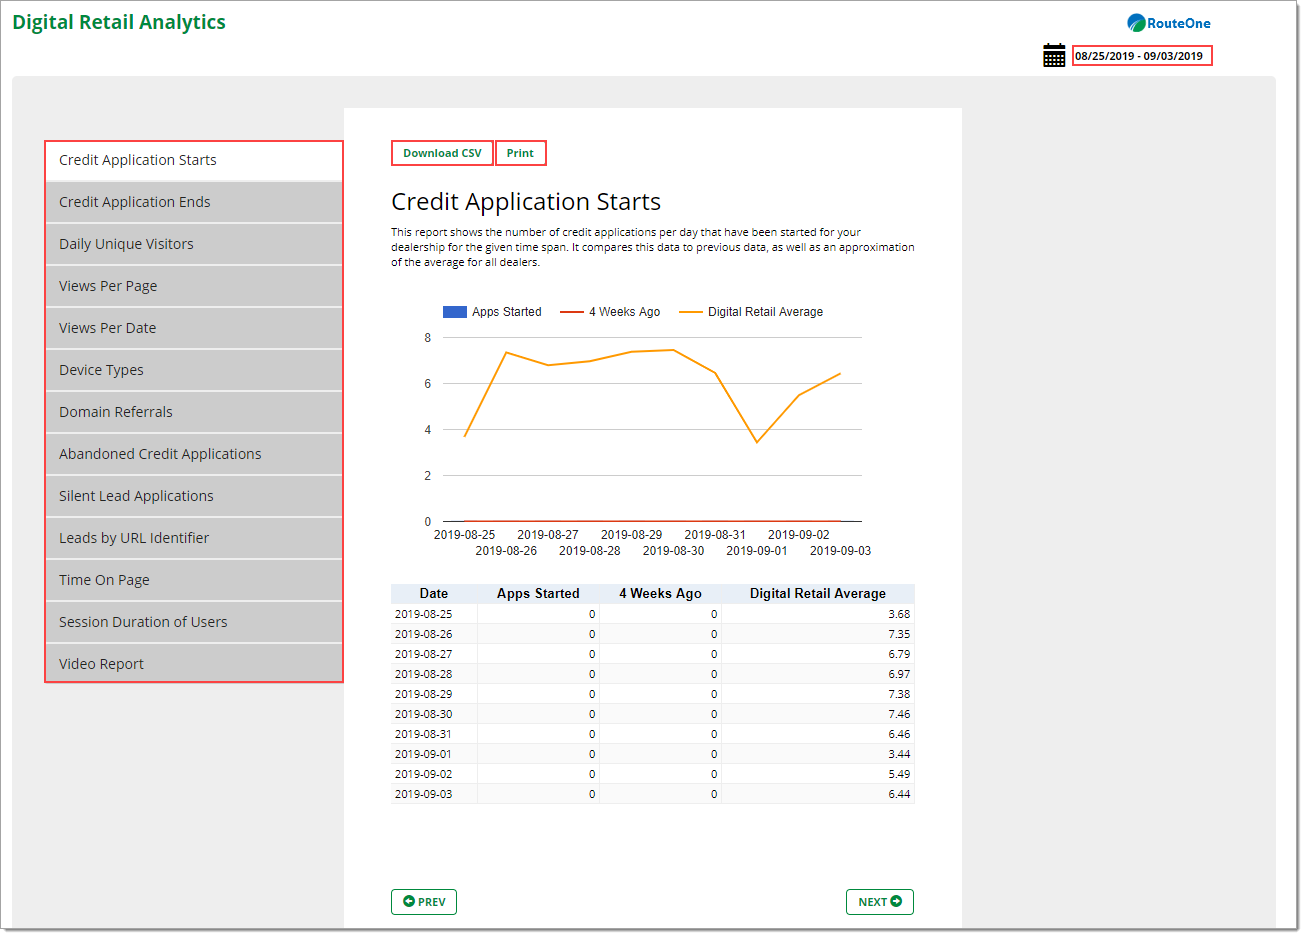 The Digital Retail Analytics page with a box highlighting the left menu showing all the different kinds of reports, and boxes highlighting the ‘Download CSV’ and ‘Print’ links at the top of the page, as well as a box highlighting the date range for the reports.